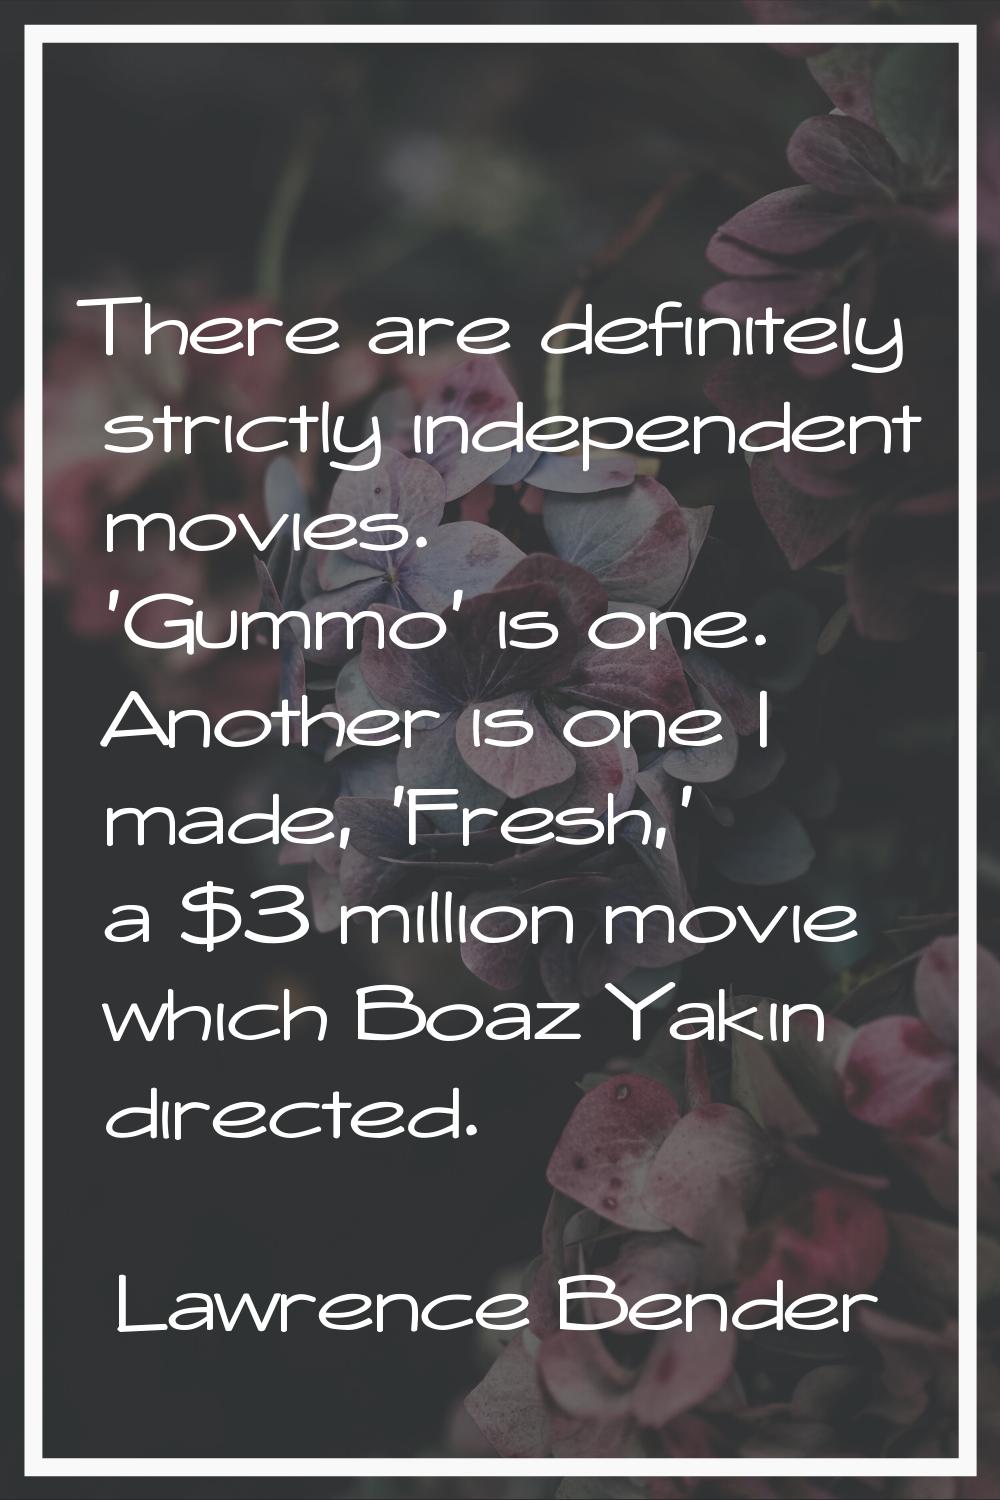 There are definitely strictly independent movies. 'Gummo' is one. Another is one I made, 'Fresh,' a